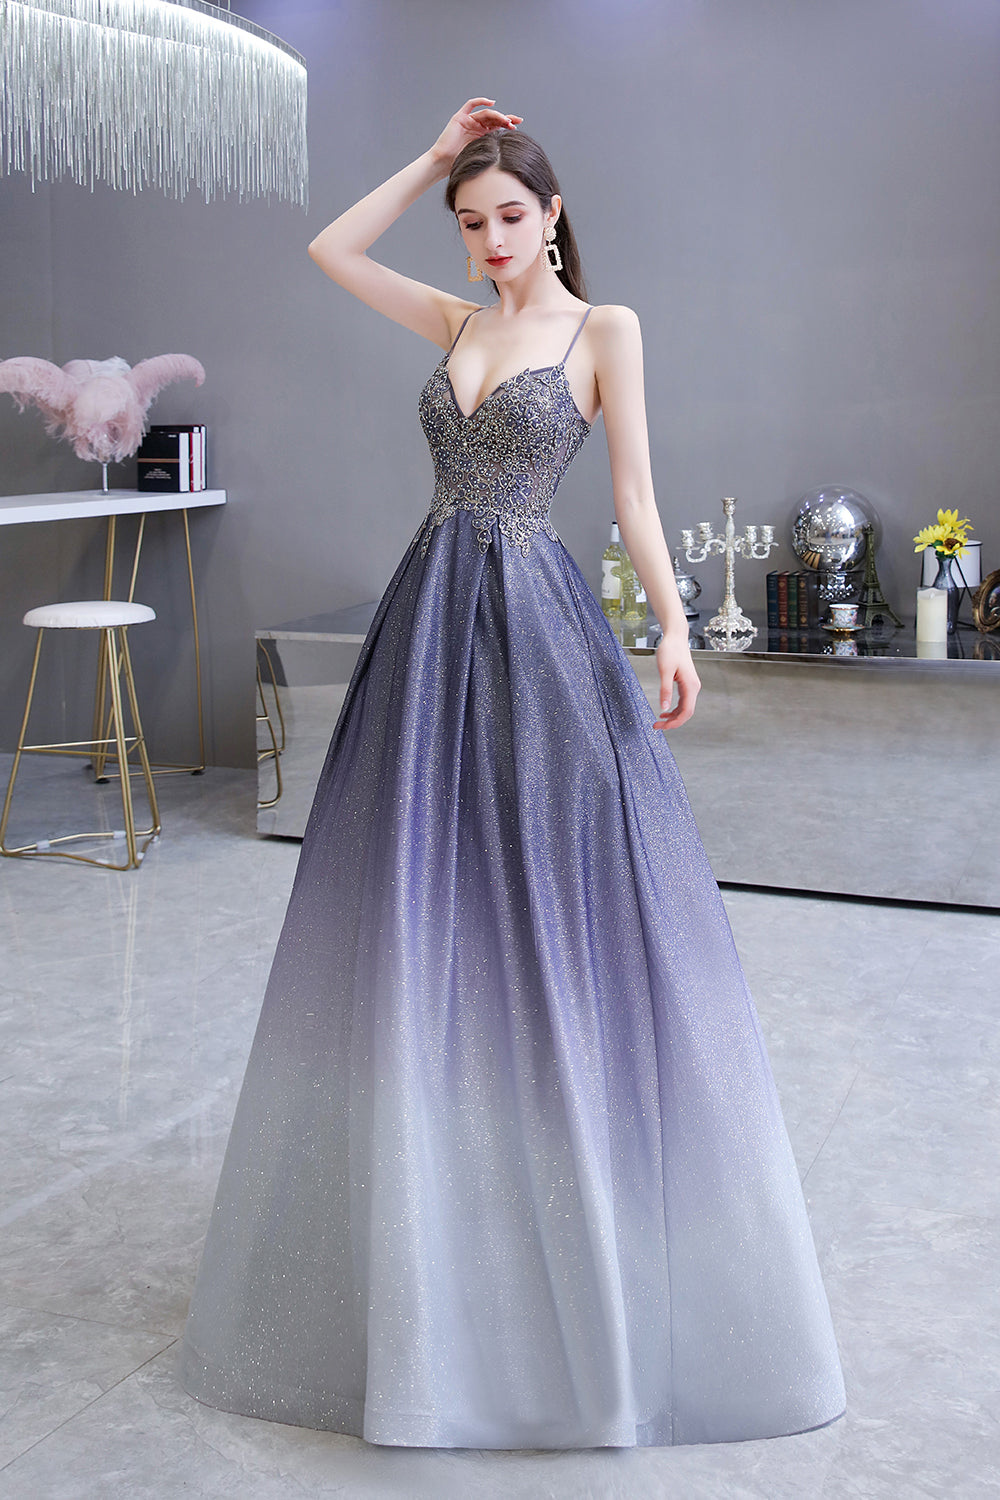 Elegant Long A-line Spaghetti Straps Appliques Beads Ombre Formal Prom Dress with Pockets